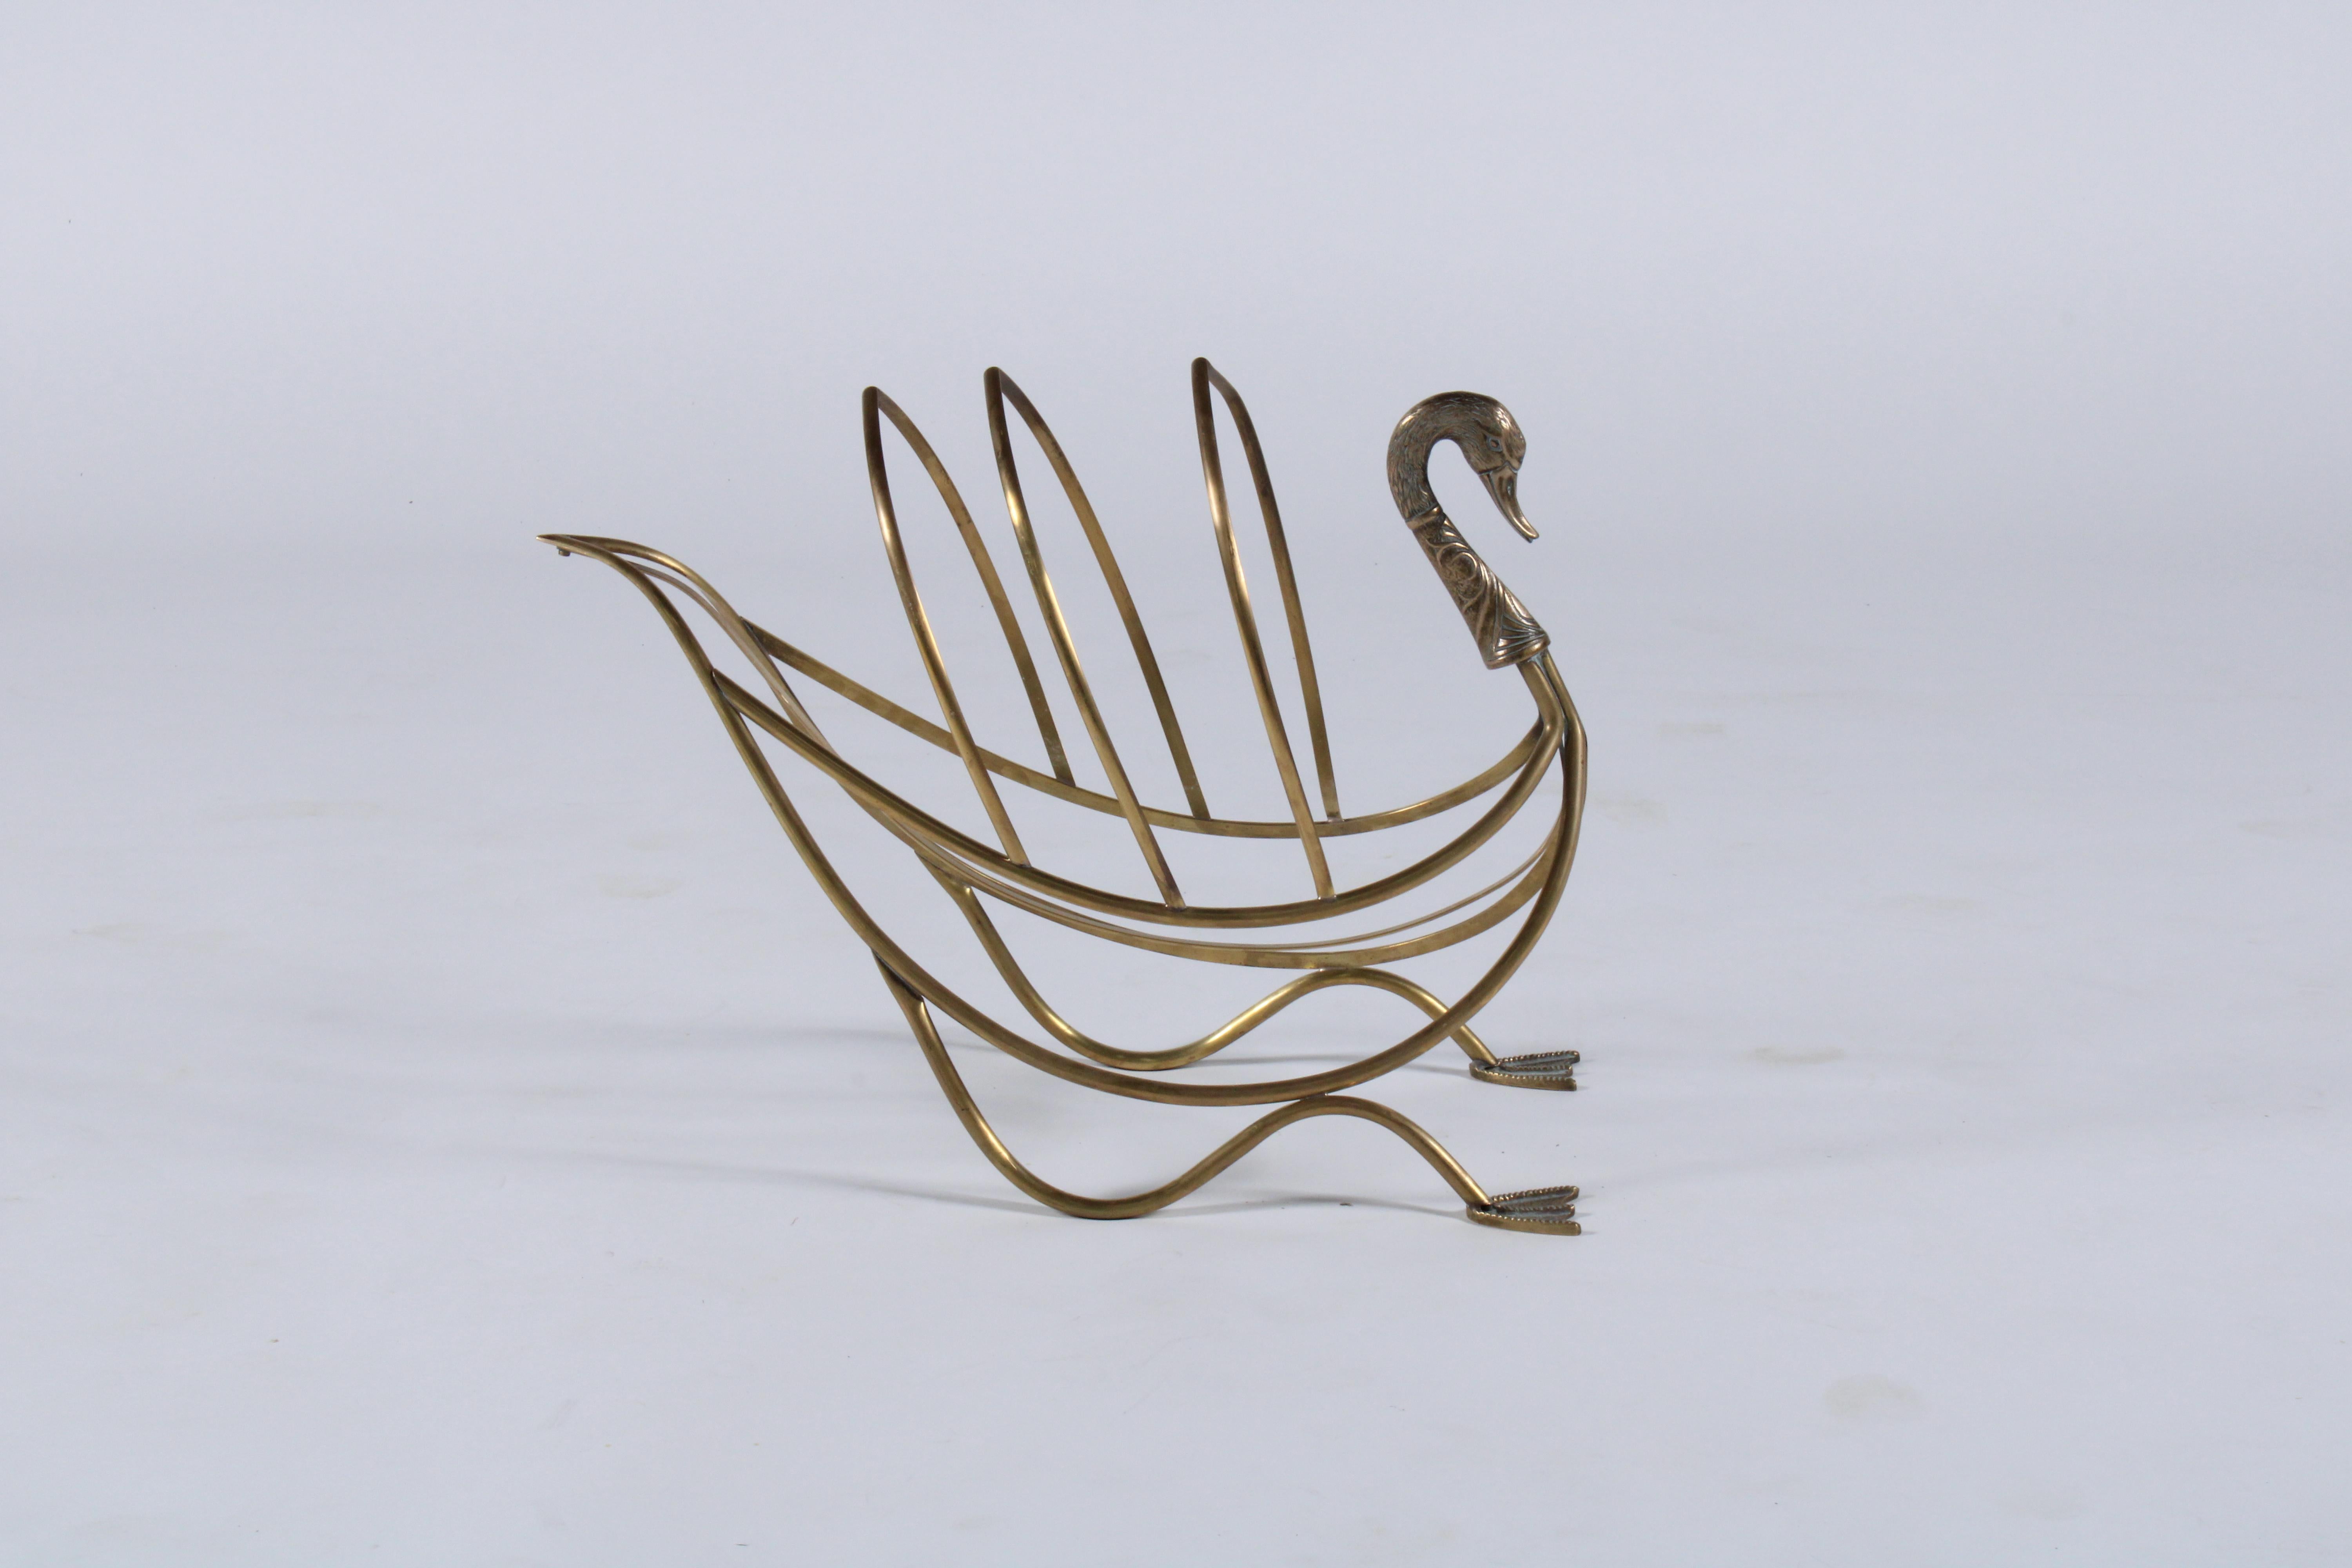 Vintage brass magazine rack in the form of a swan. Attributed to Maison Jansen of Paris this piece was produced circa 1960. A stylish decorative functional and fun piece for any home or commercial premises.